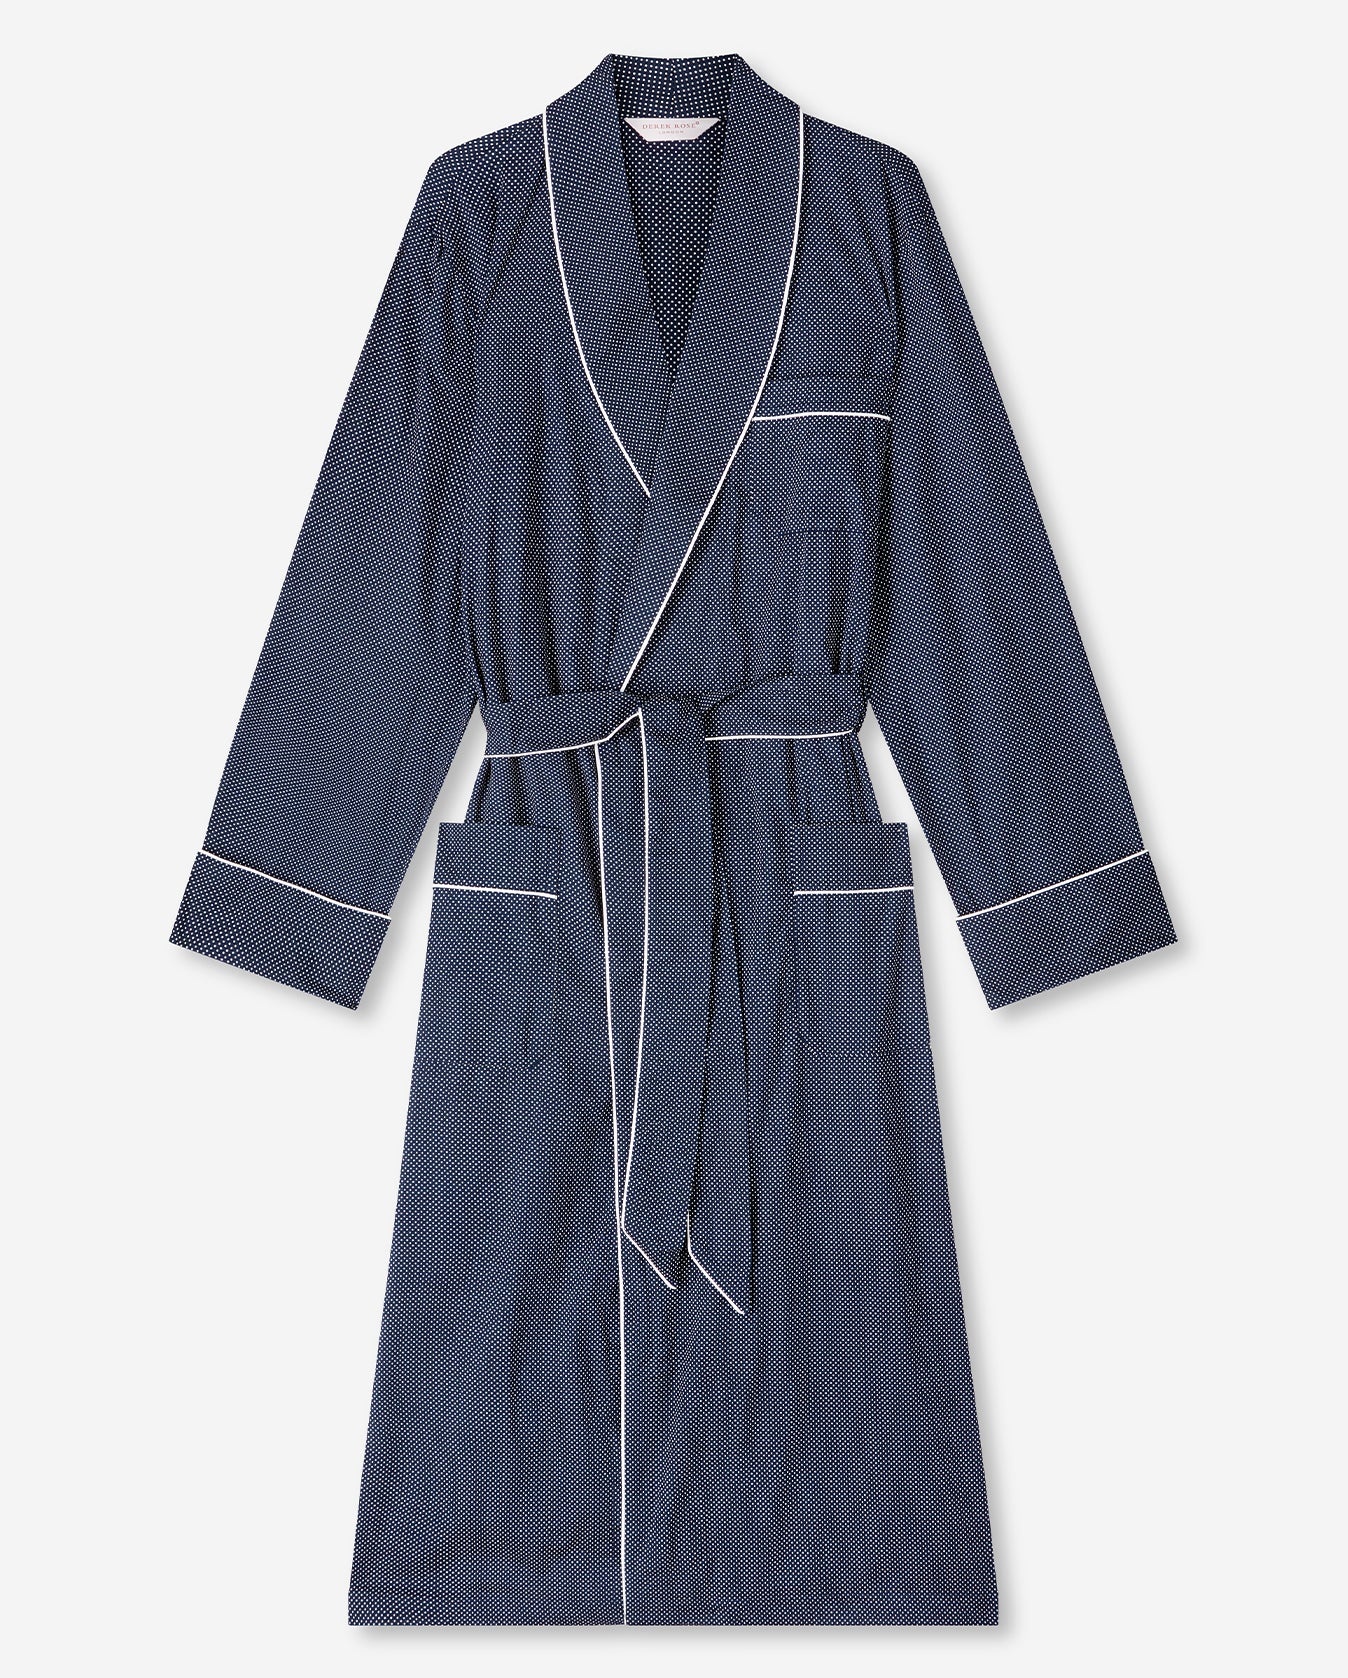 Plaza Robe With Piping - Navy - 3